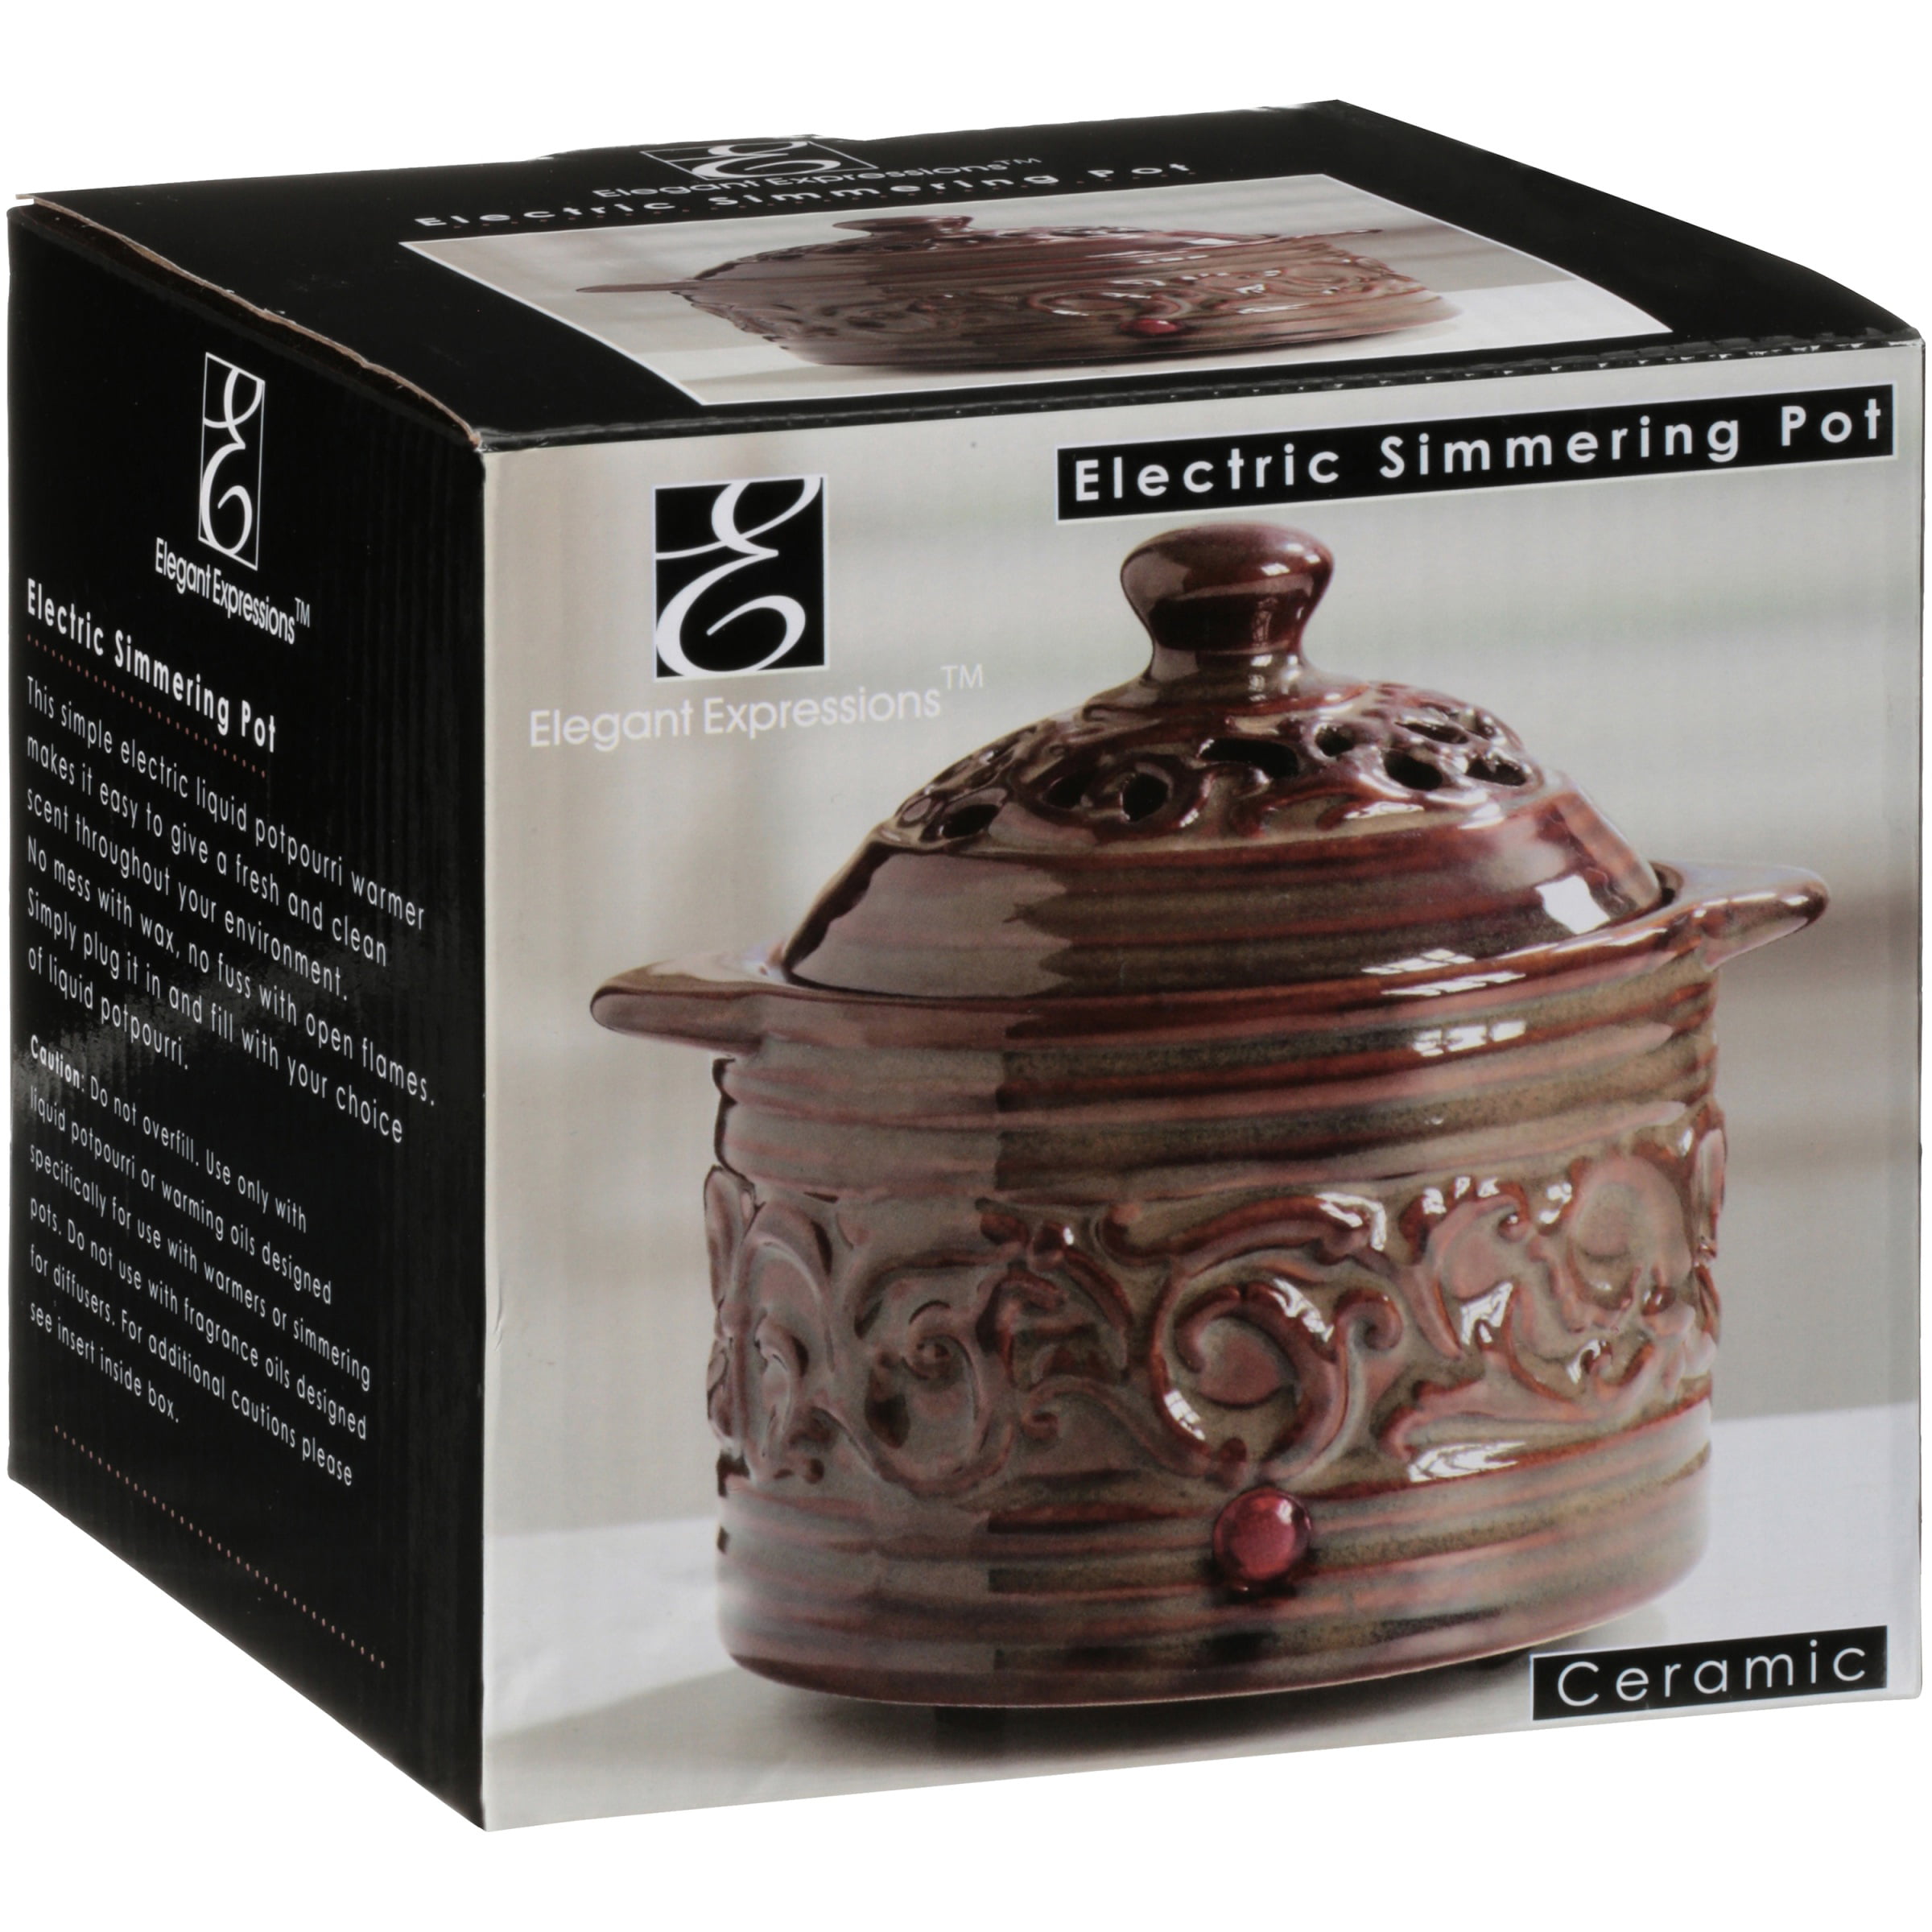 Wholesale Electric Simmering Potpourri Pot Products at Factory Prices from  Manufacturers in China, India, Korea, etc.